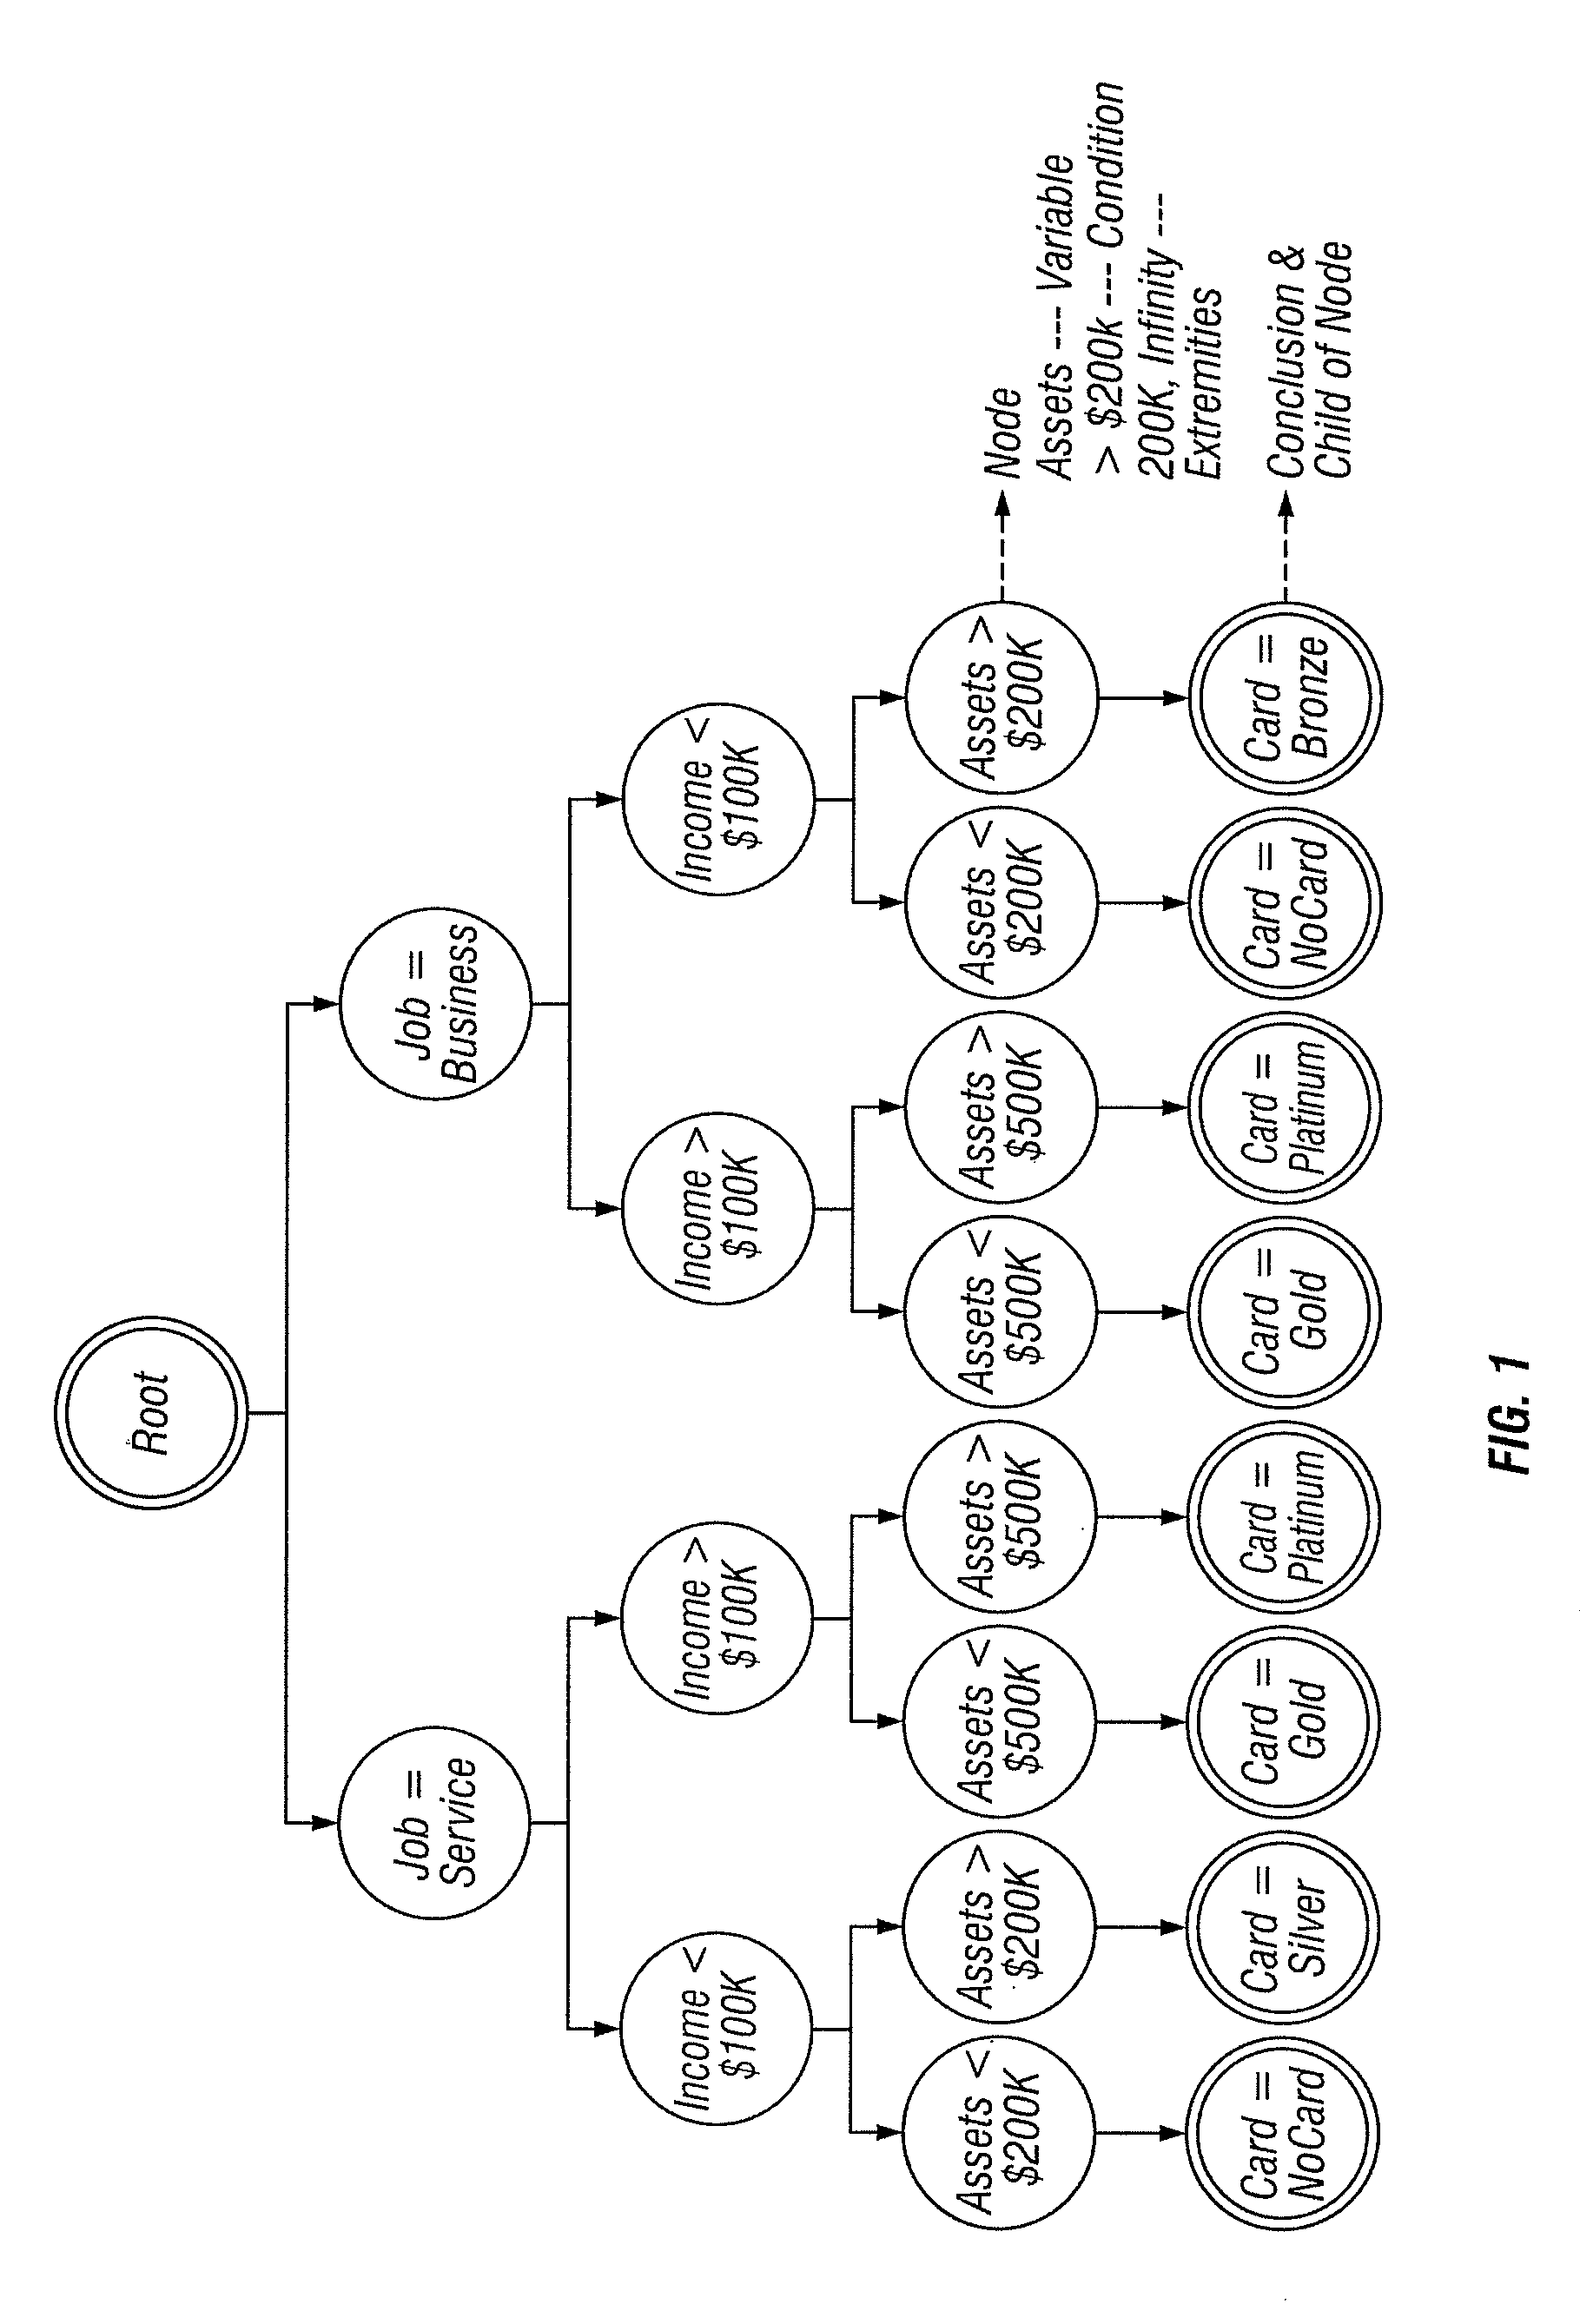 Article and method for finding a compact representation to visualize complex decision trees